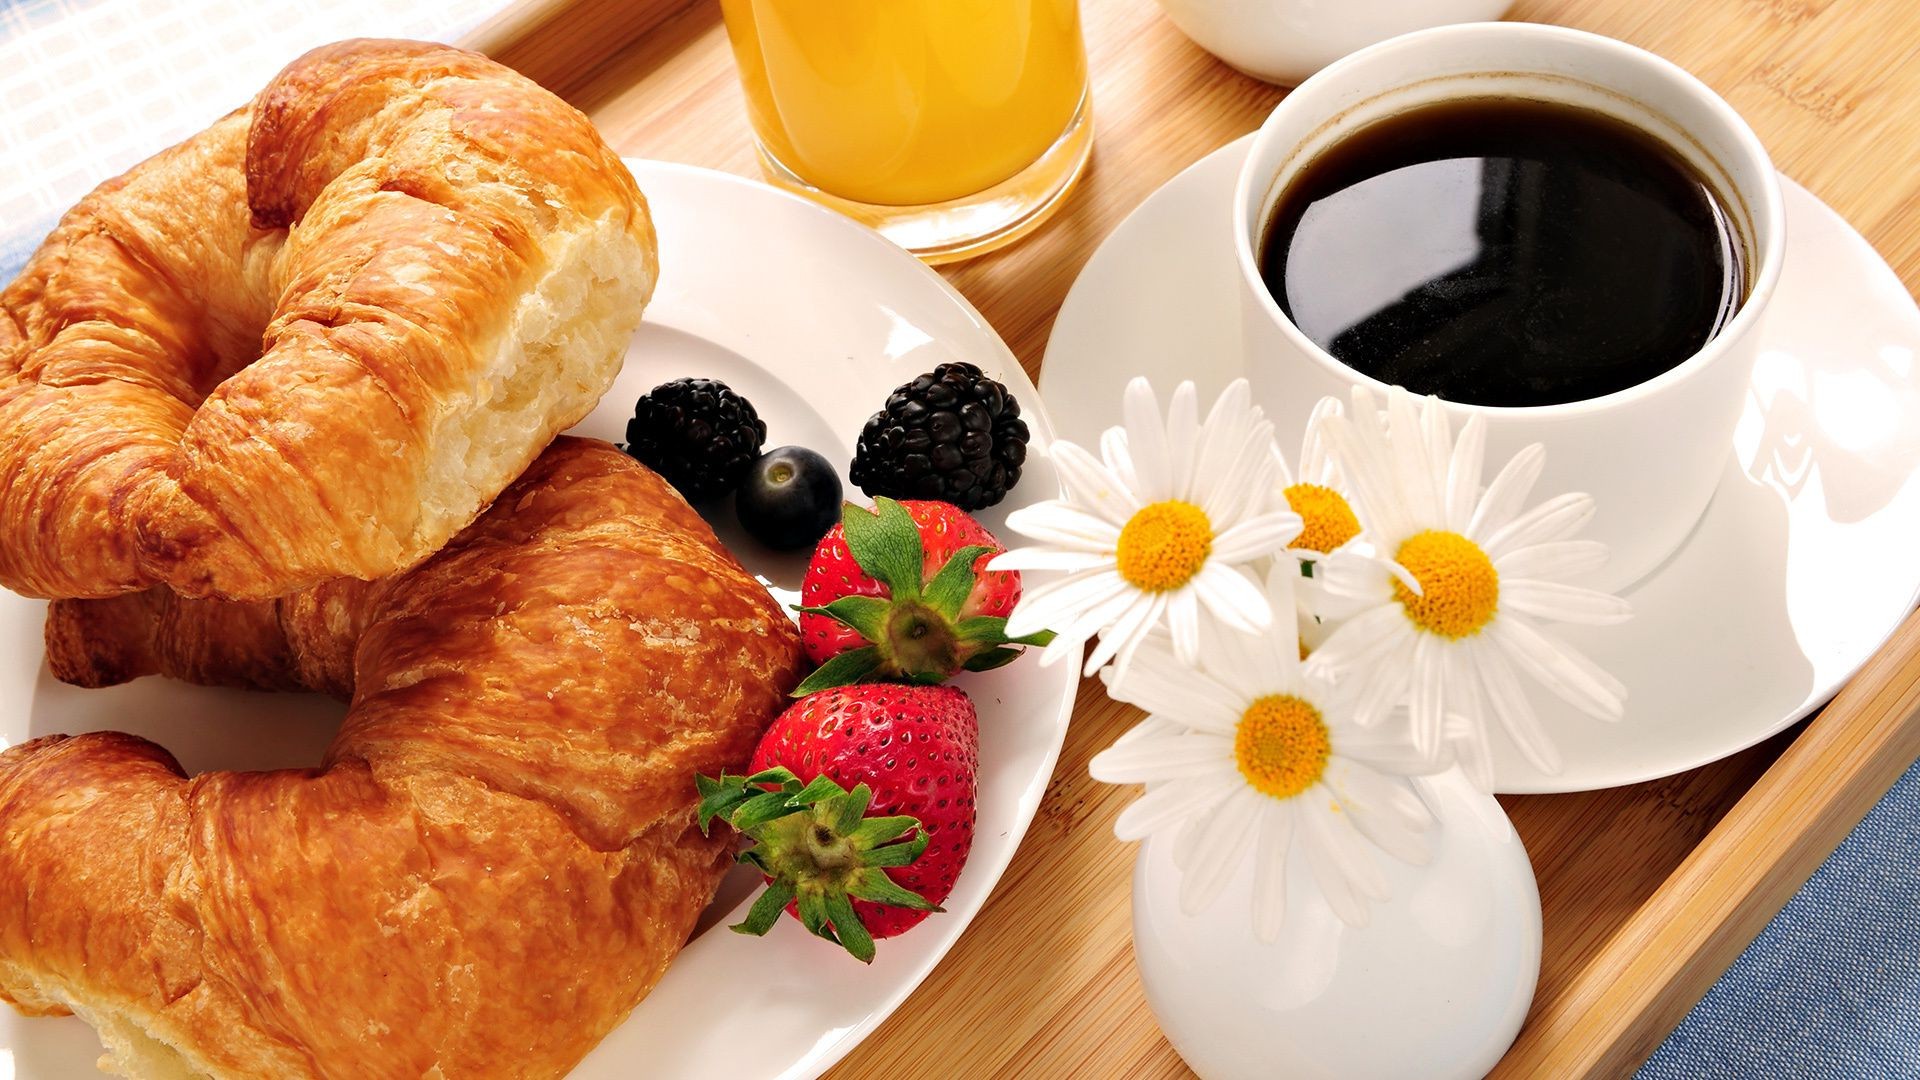 food & drink breakfast coffee dawn cup croissant delicious food hot drink sugar pastry sweet plate jam bread refreshment espresso traditional table